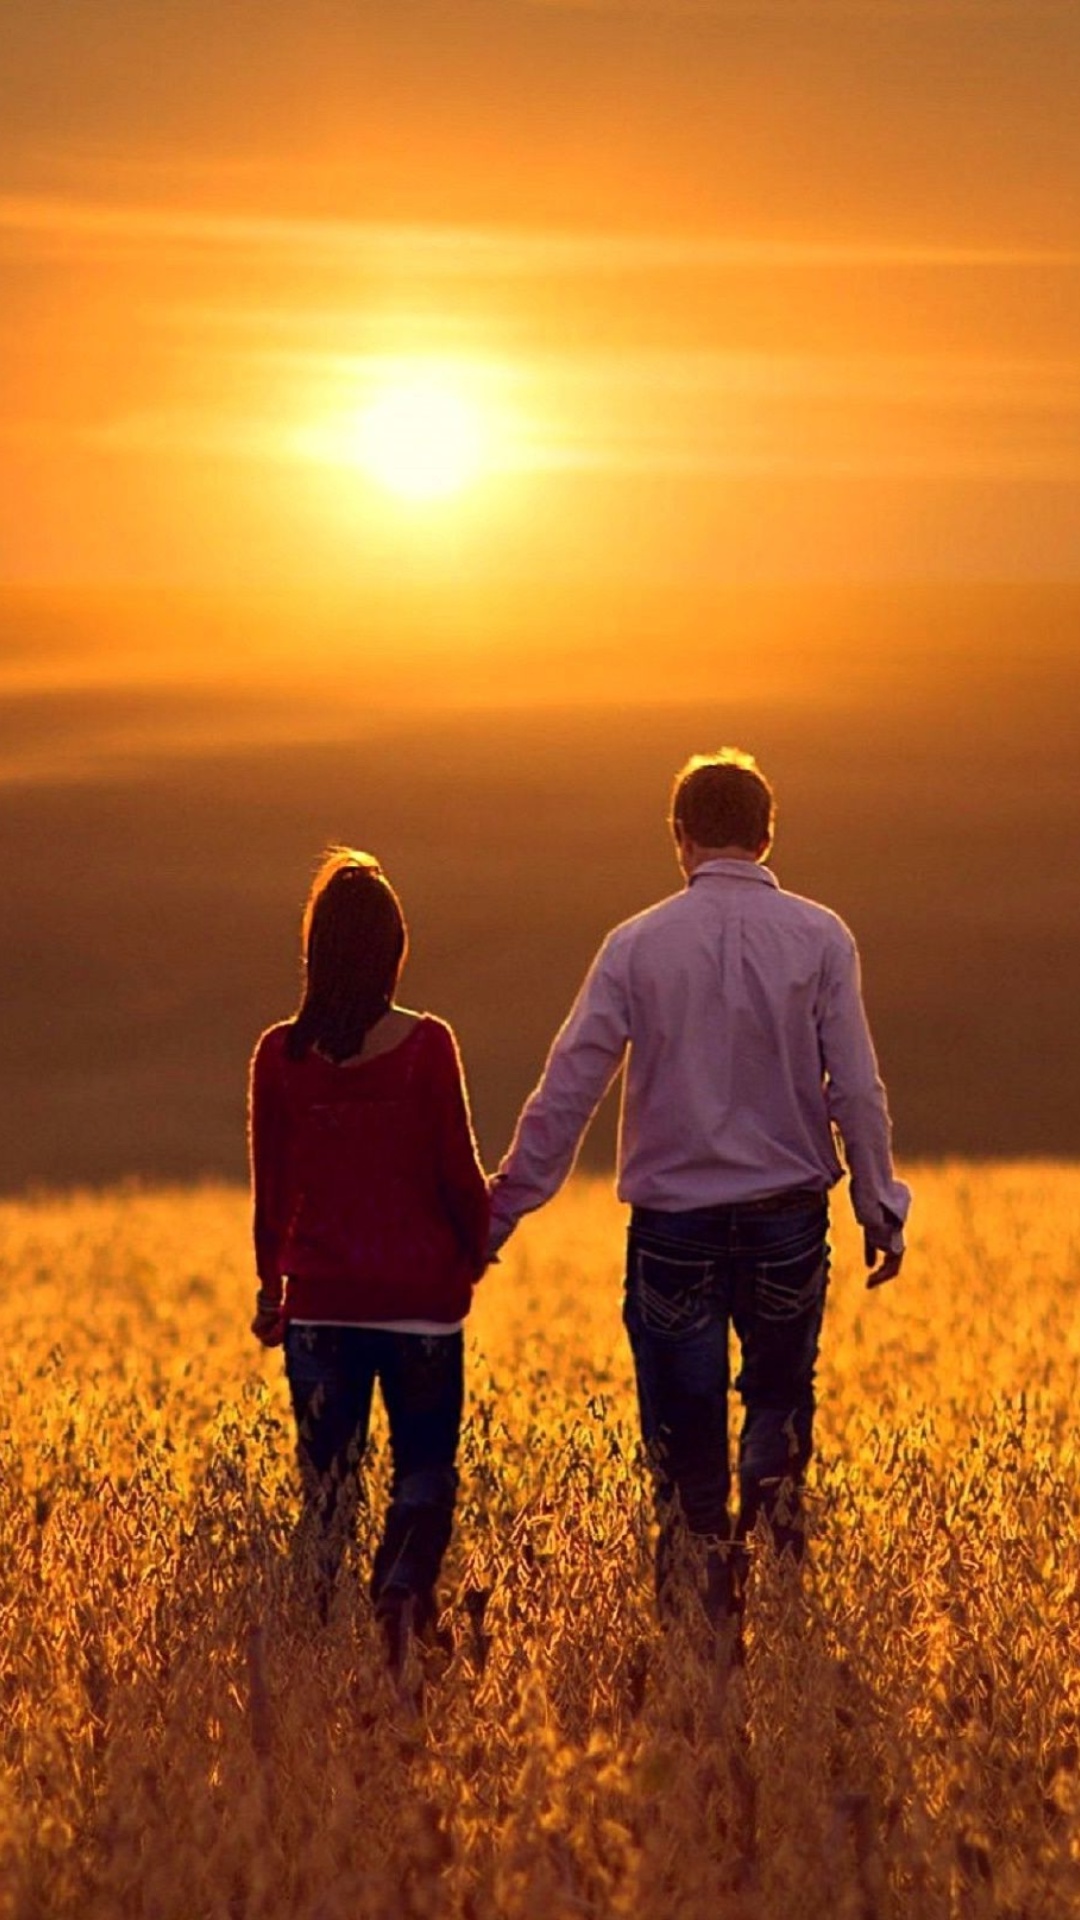 Couple at sunset wallpaper 1080x1920